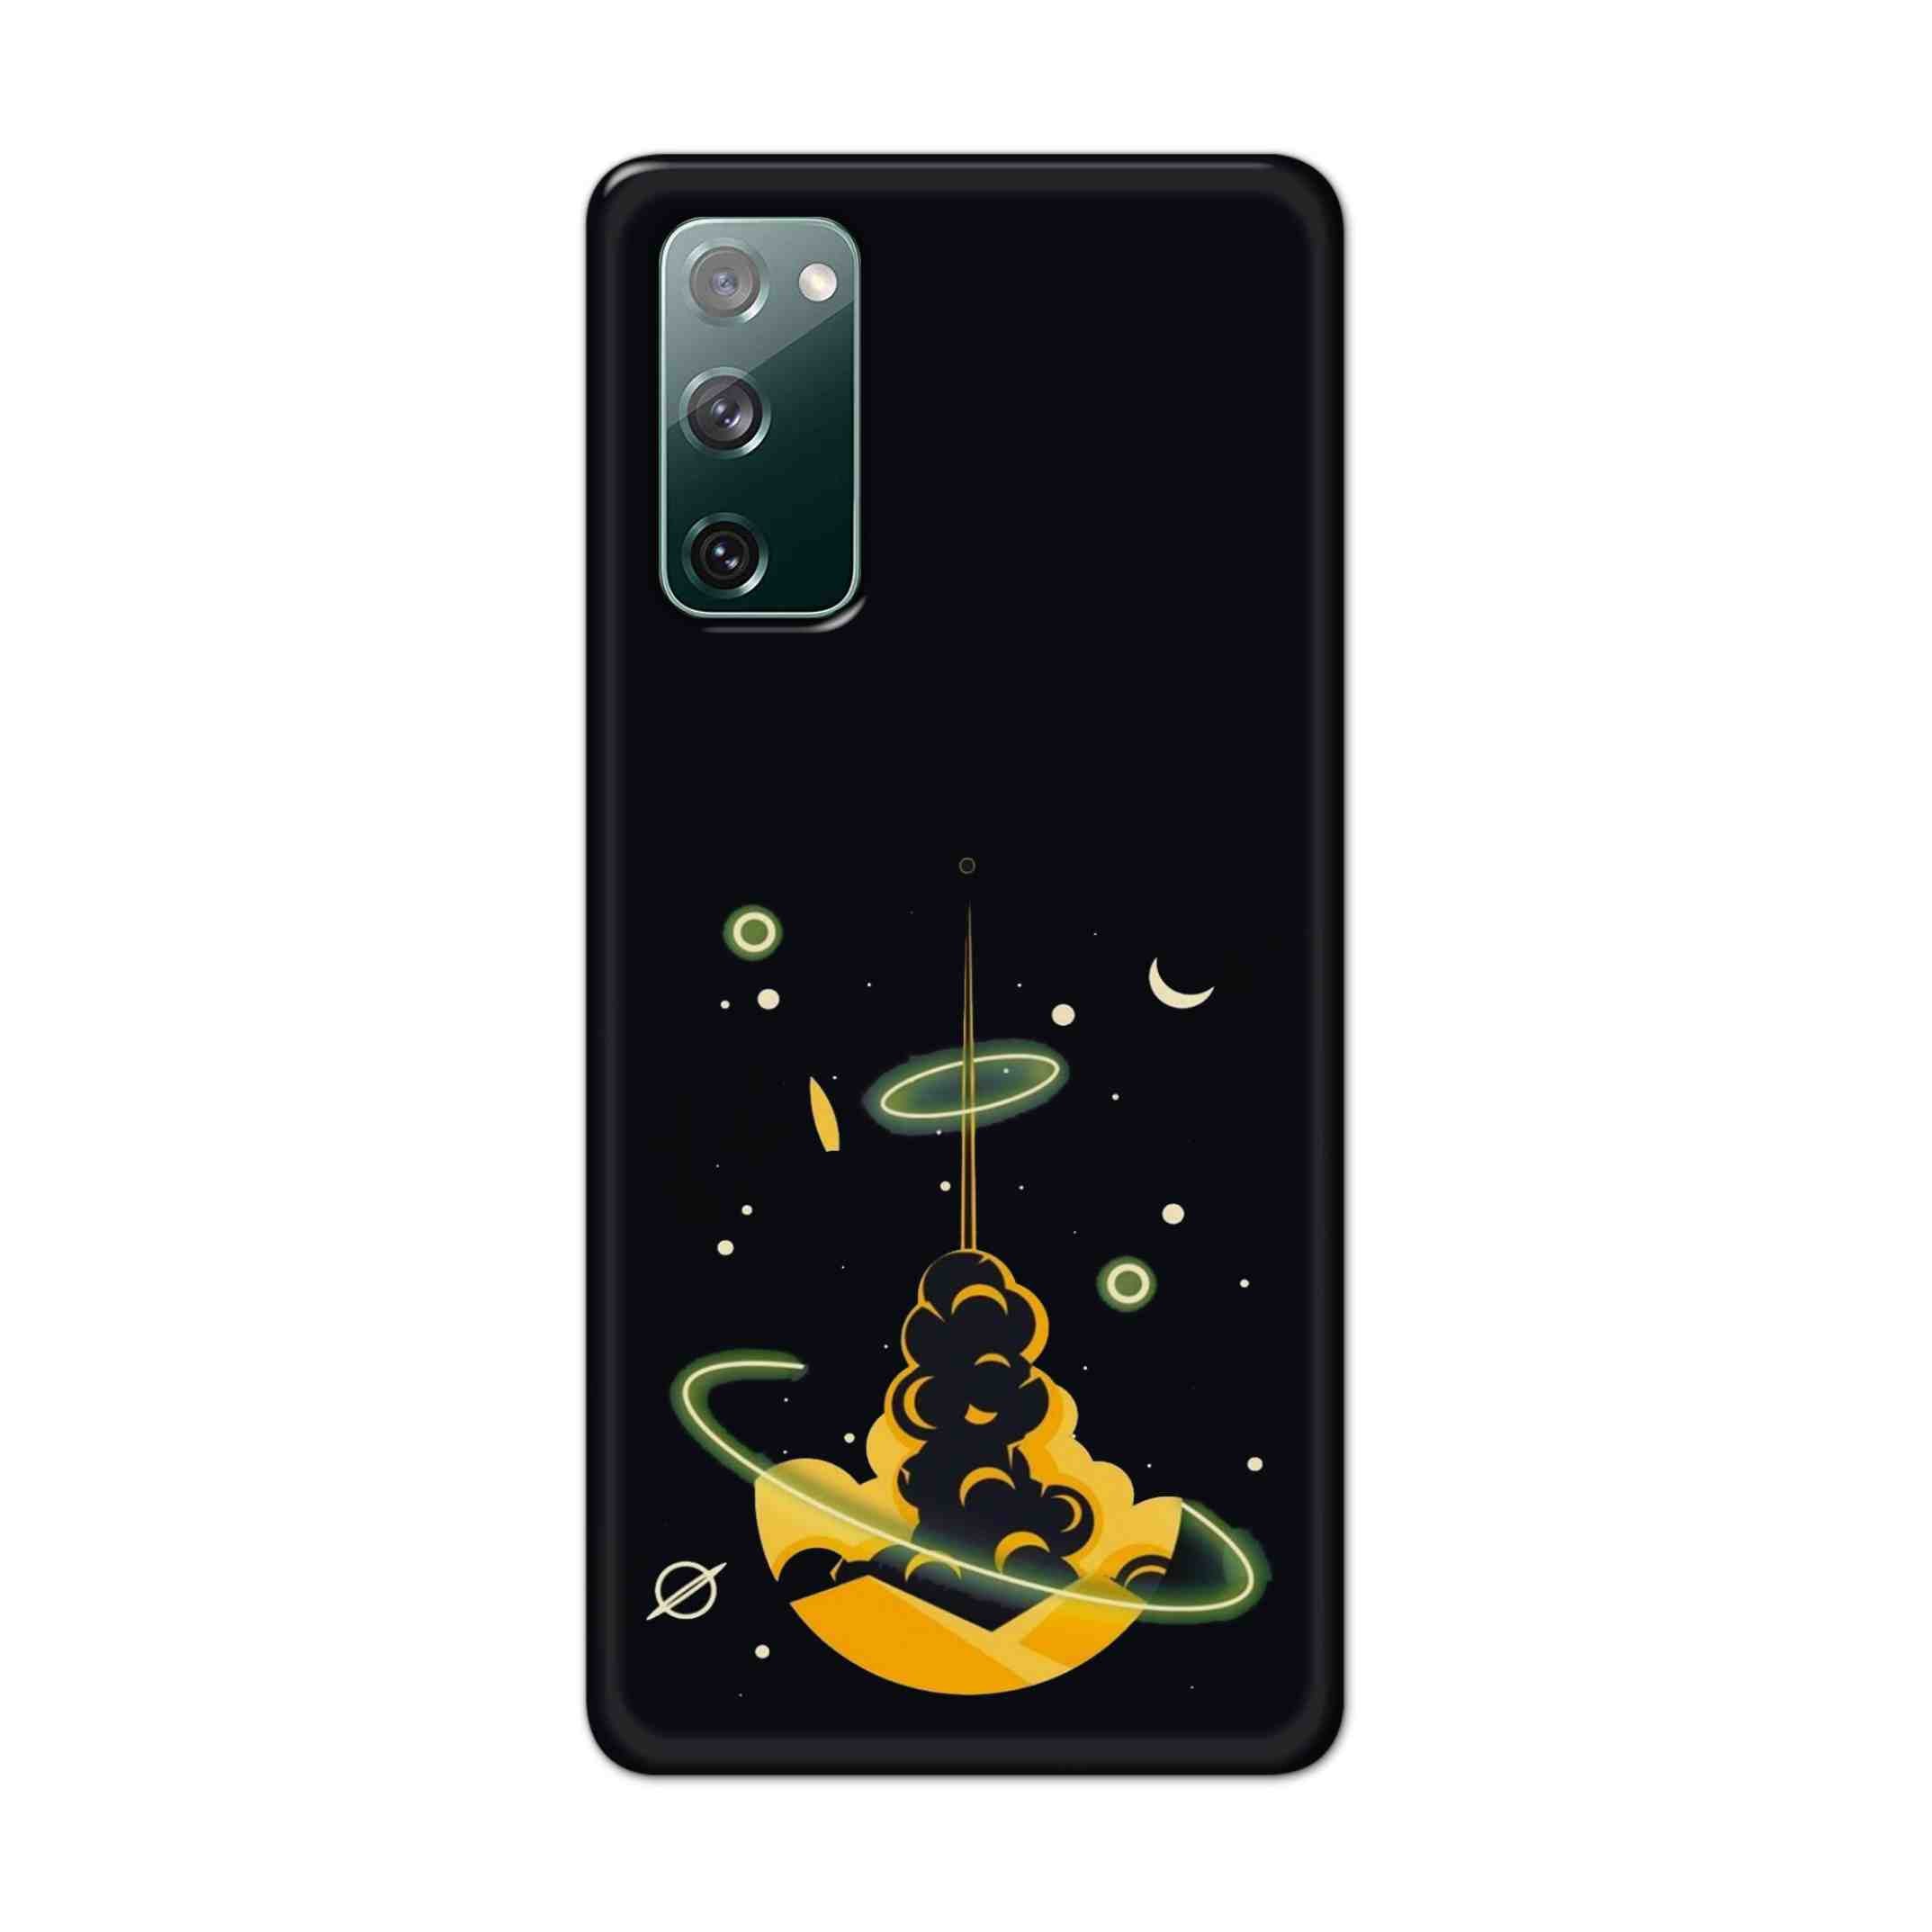 Buy Moon Hard Back Mobile Phone Case Cover For Samsung Galaxy S20 FE Online